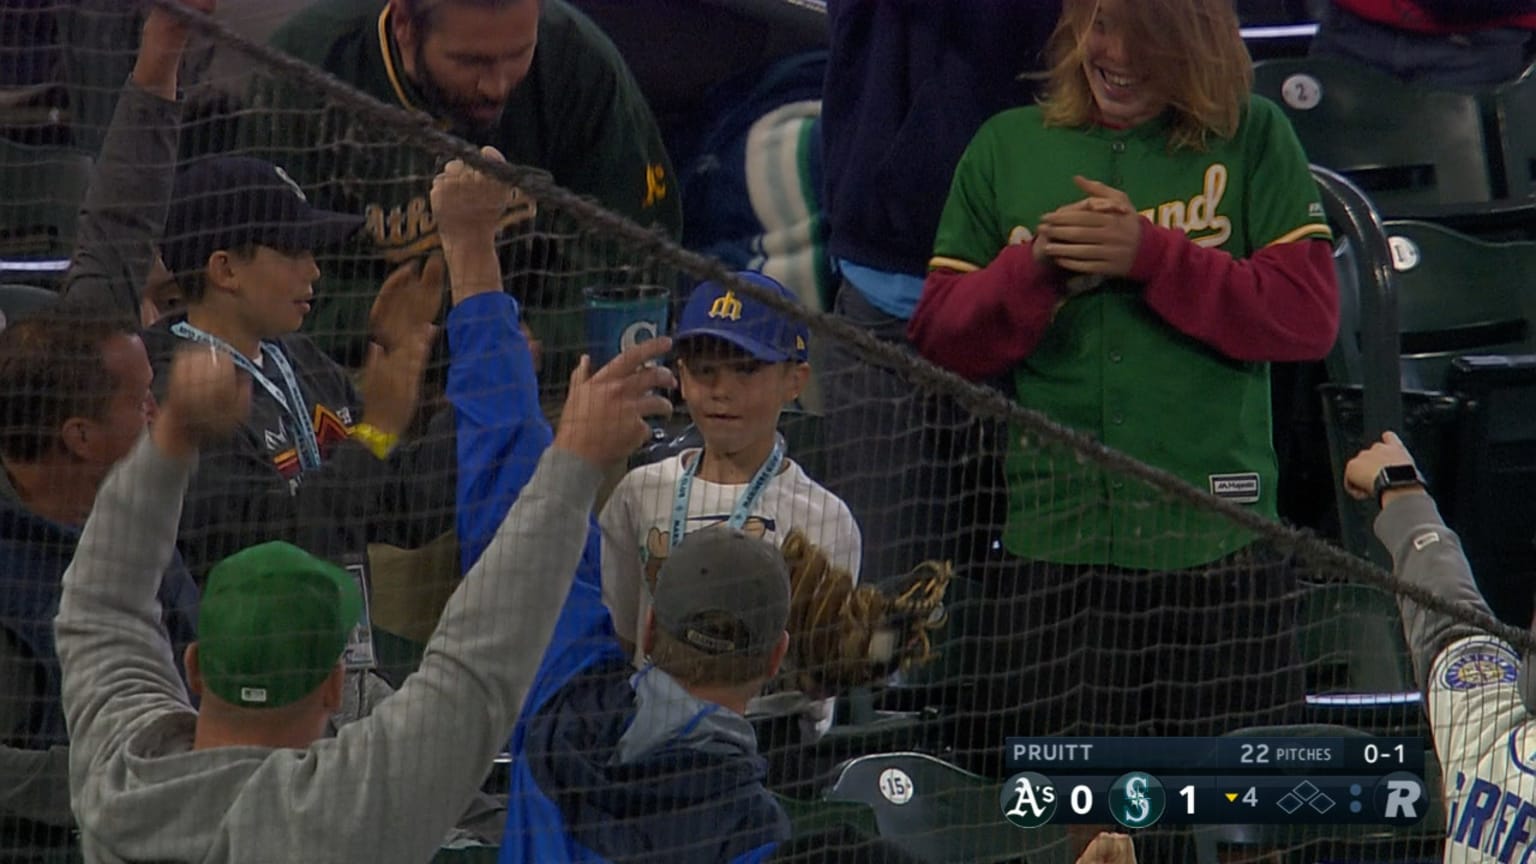 Teenage Red Sox fan gifts foul ball to the little boy sitting